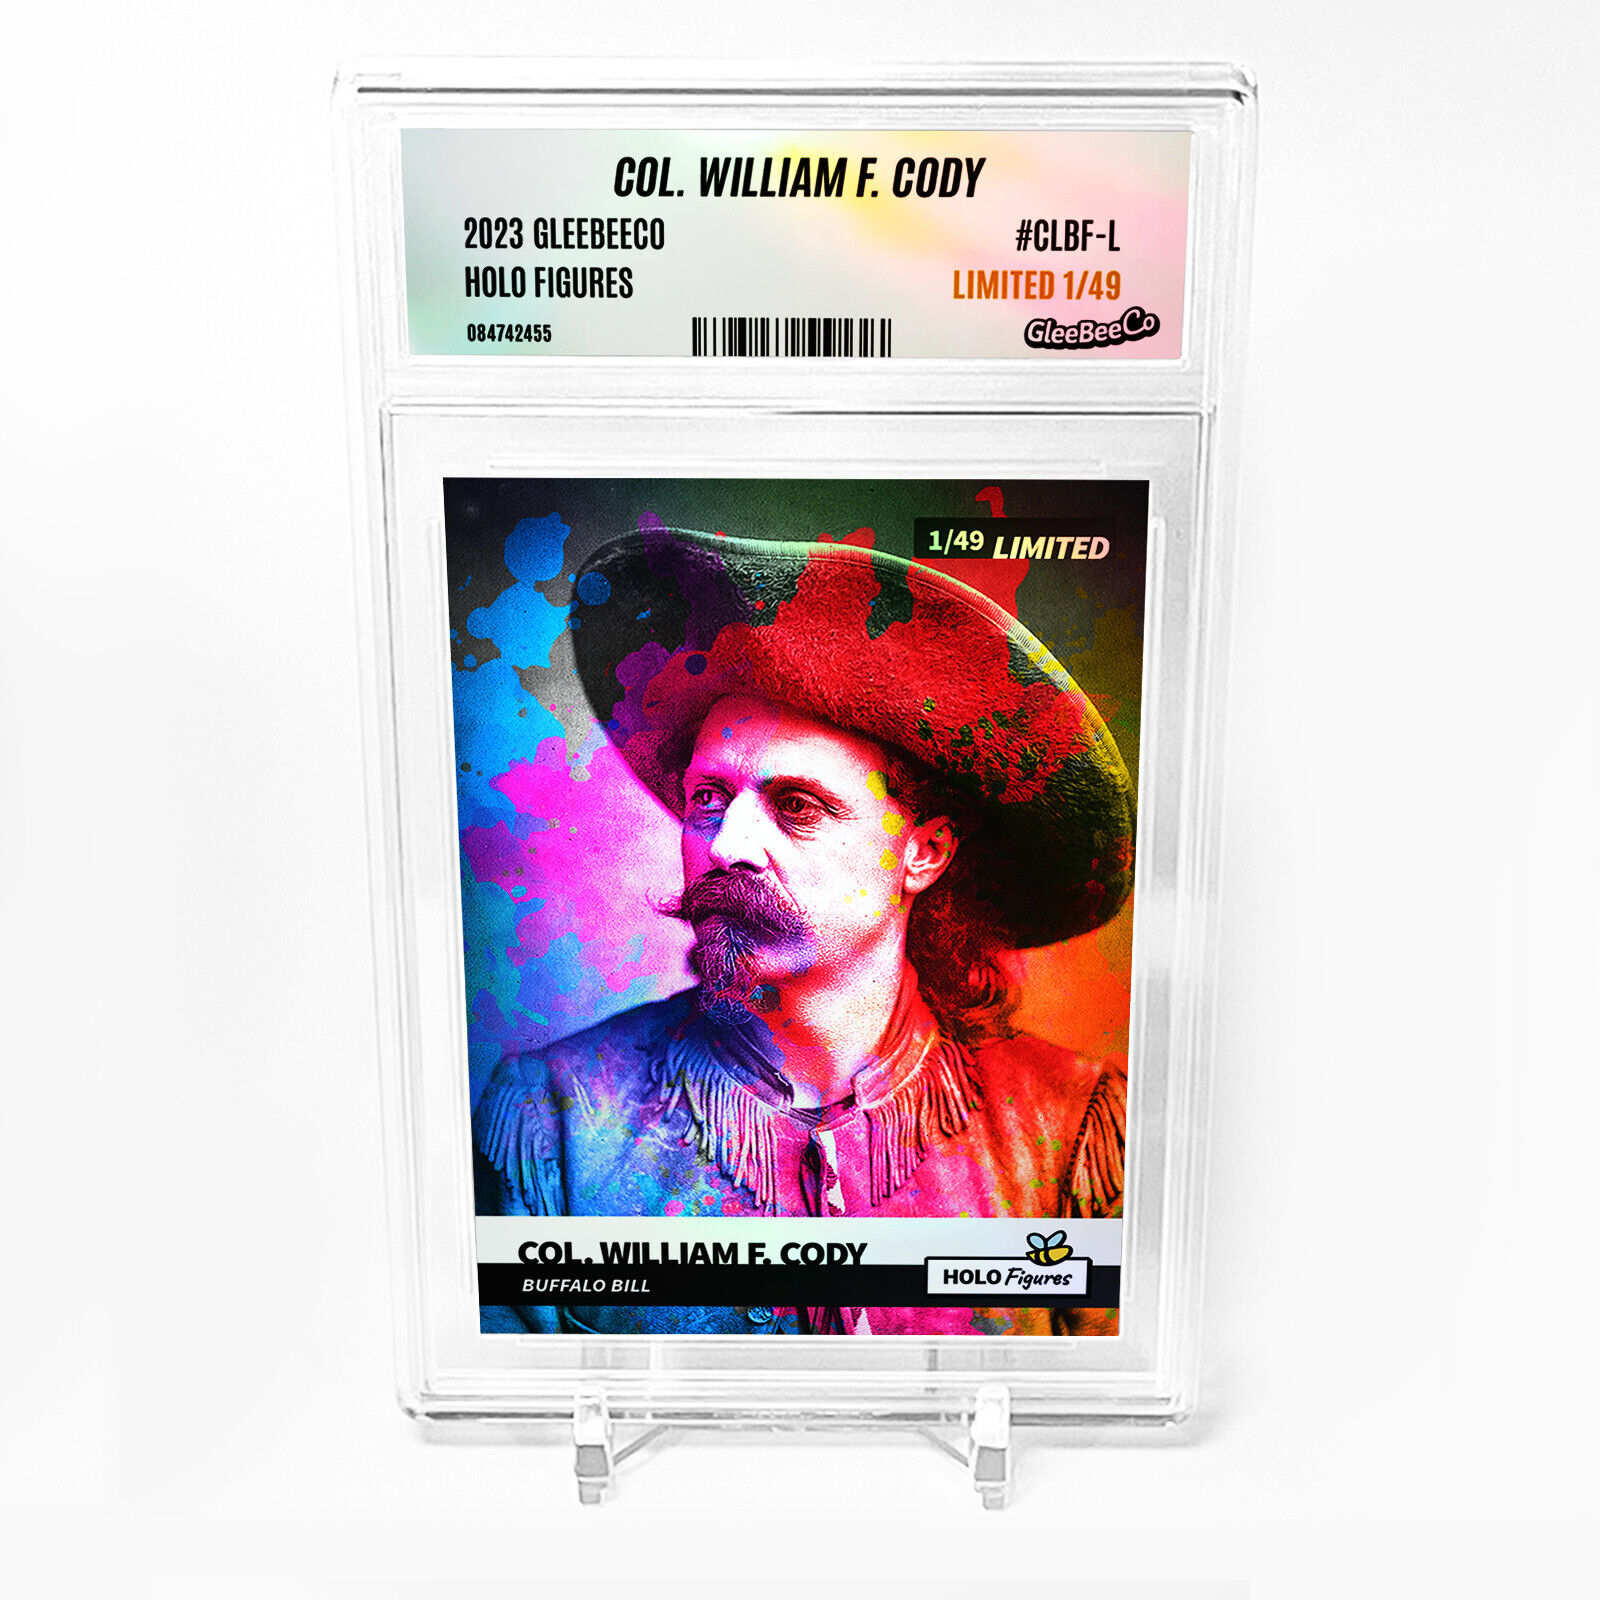 COL. WILLIAM F. CODY Holographic Card 2023 GleeBeeCo Slabbed #CLBF-L Only /49